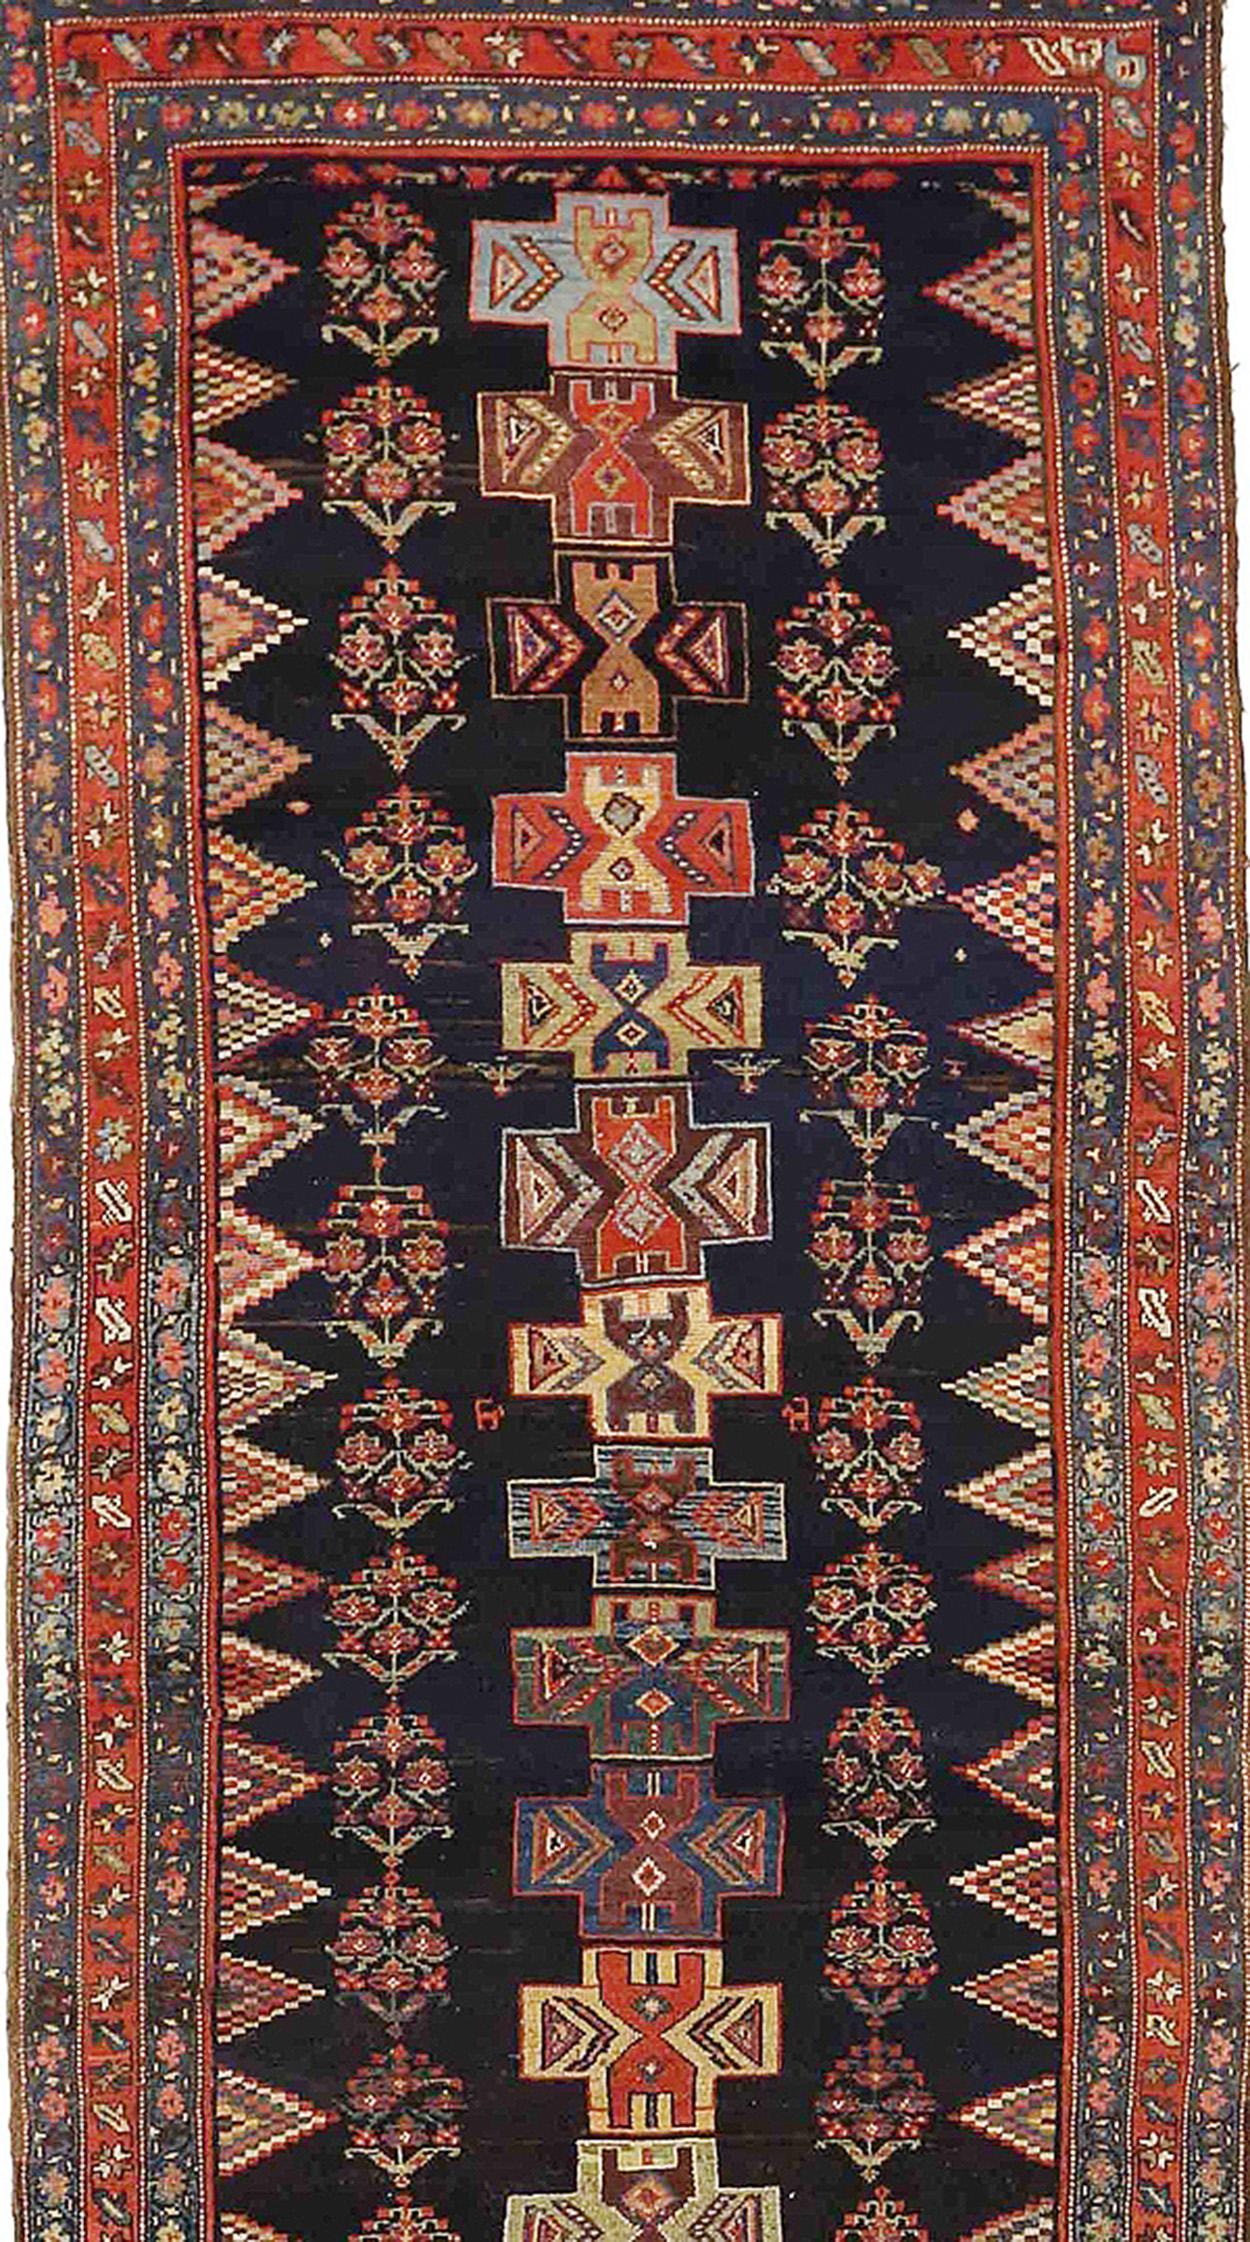 Antique Persian runner rug handwoven from the finest sheep’s wool and colored with all-natural vegetable dyes that are safe for humans and pets. It’s a traditional Bijar design featuring multicolored flower and cross medallion details over a navy